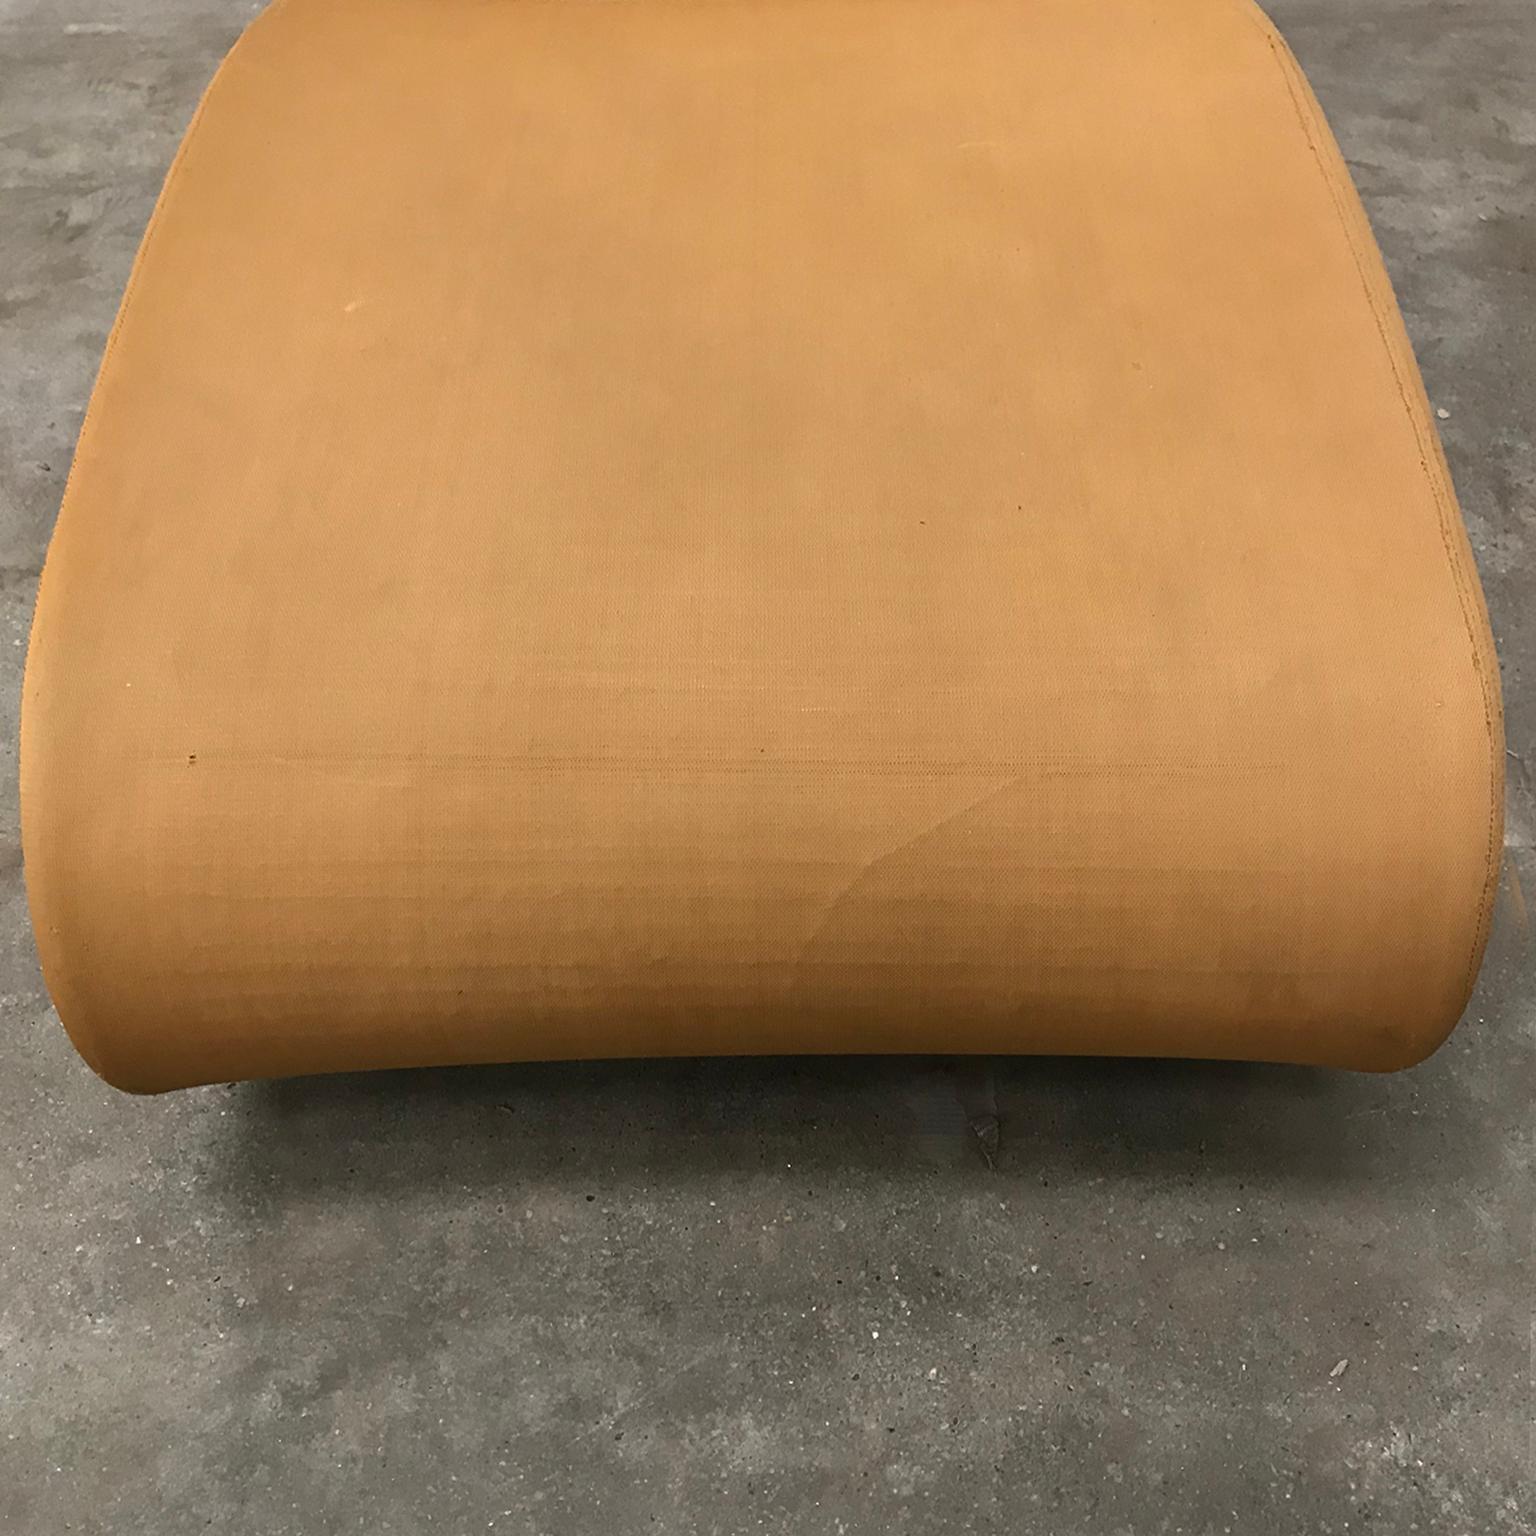 1973, Verner Panton for Rosenthal, 1-2-3 Serie, Rare Chaise Longue, Ochre Fabric For Sale 5